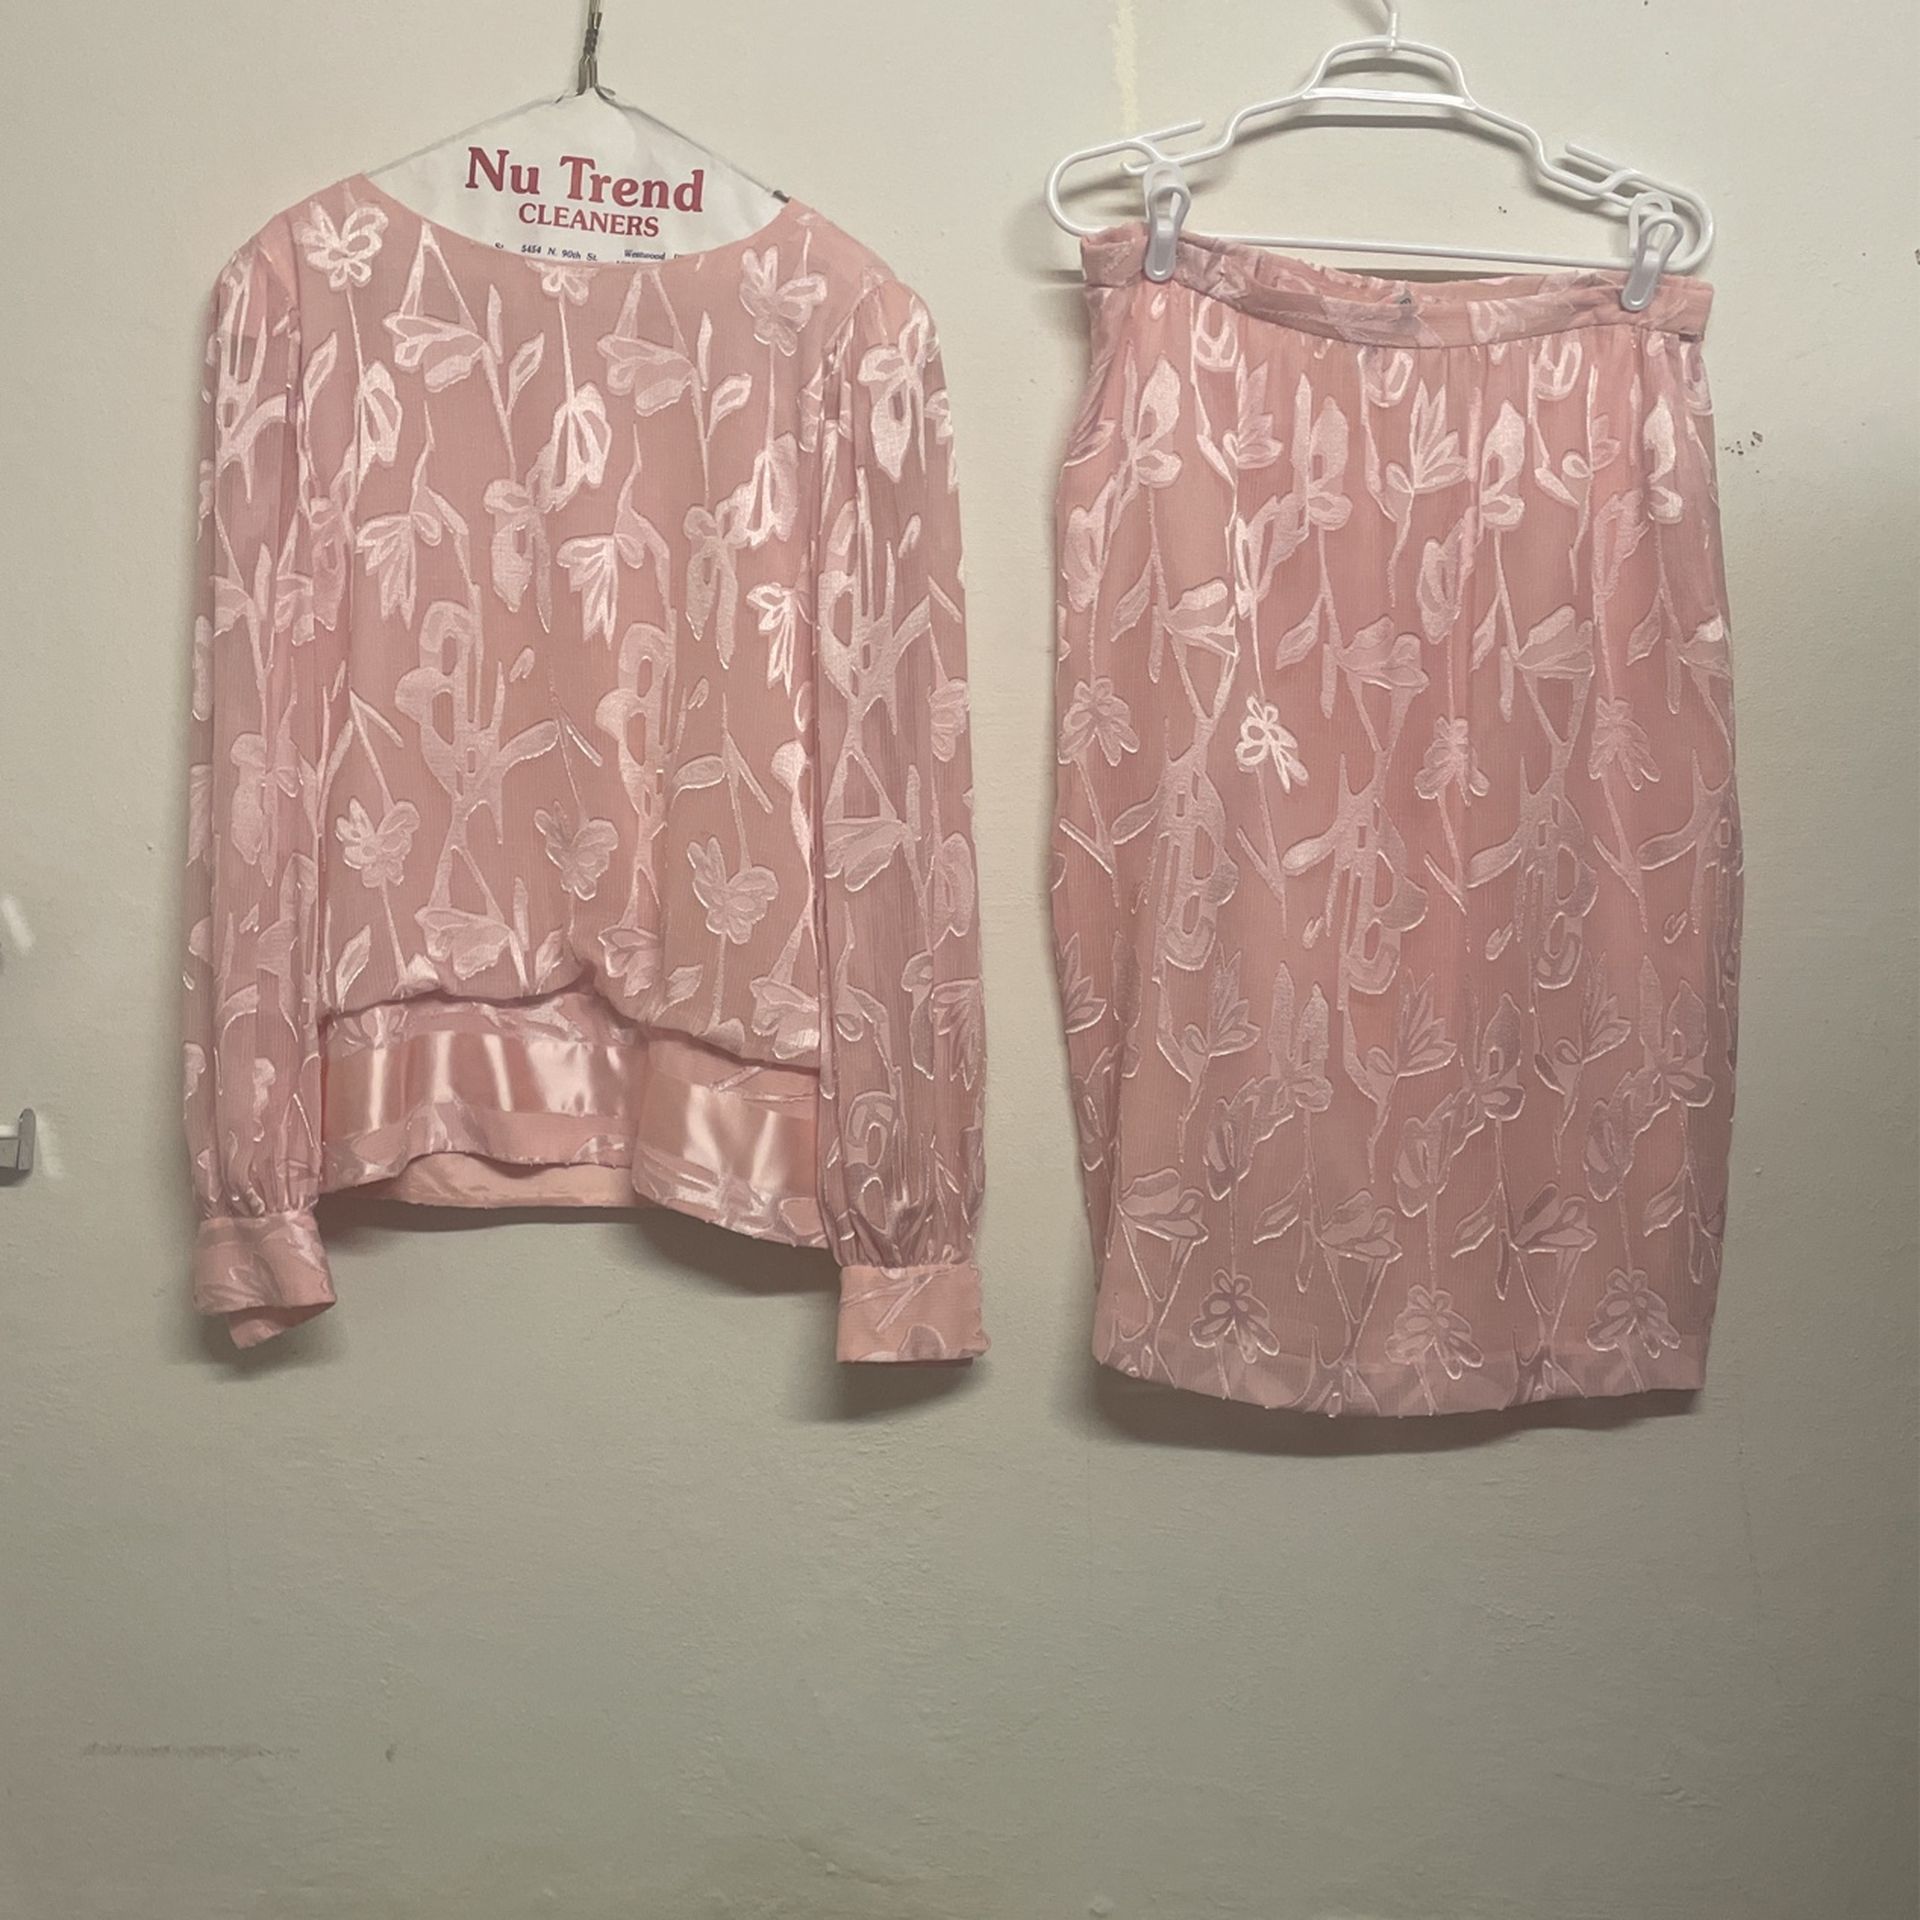 Rimini Woman’s Blouse And Matching Skirt Pink Size 14